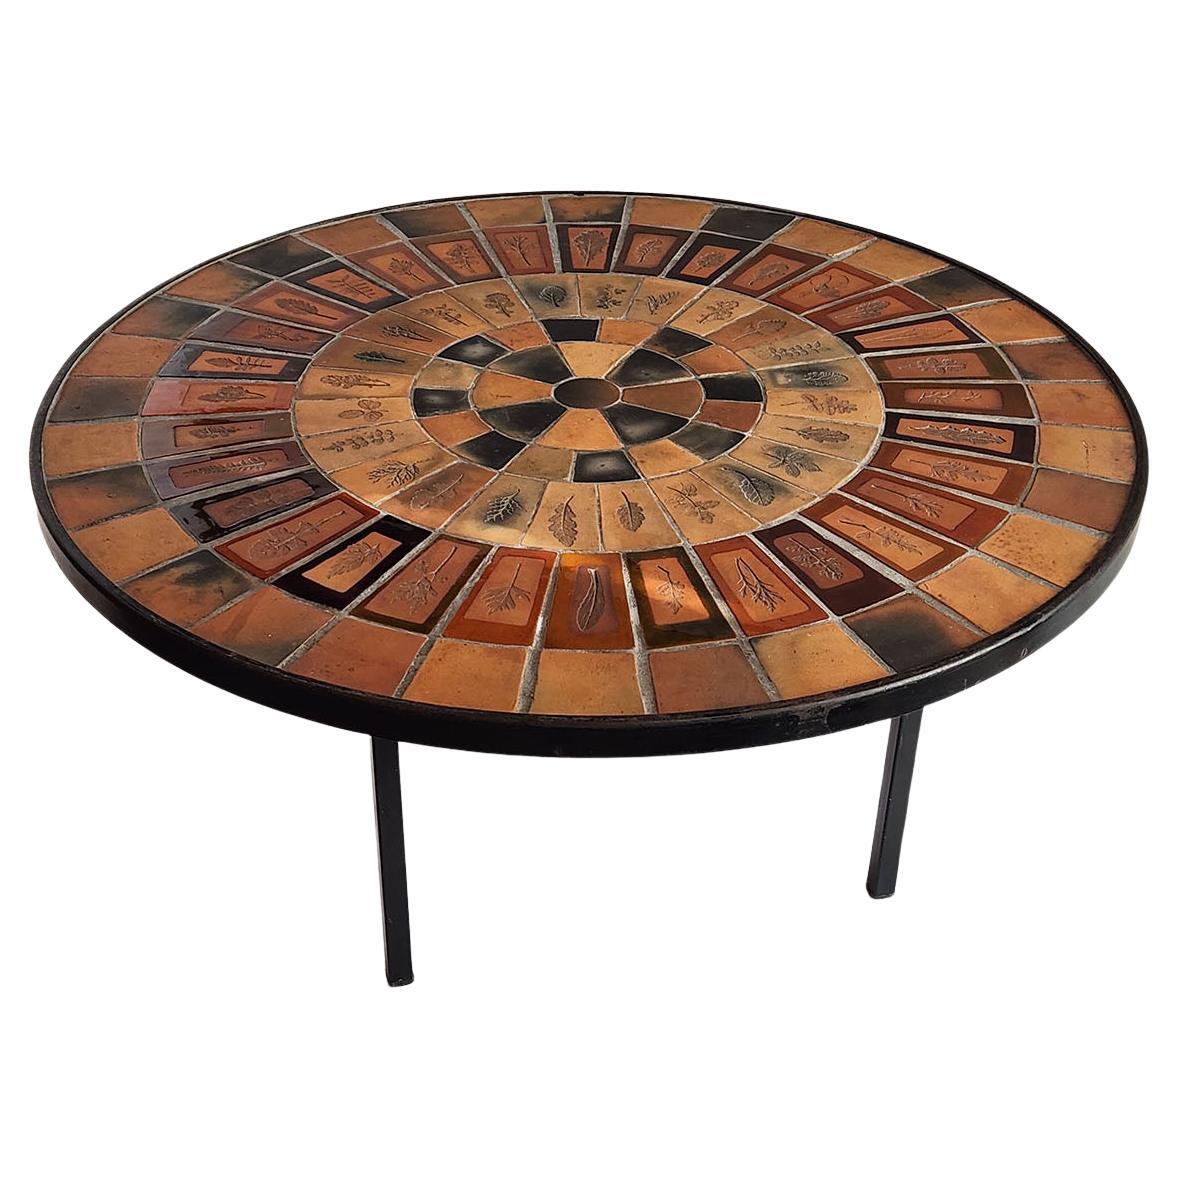 Roger Capron - Round Ceramic Coffee Table with Herbier tiles on Metal Frame For Sale